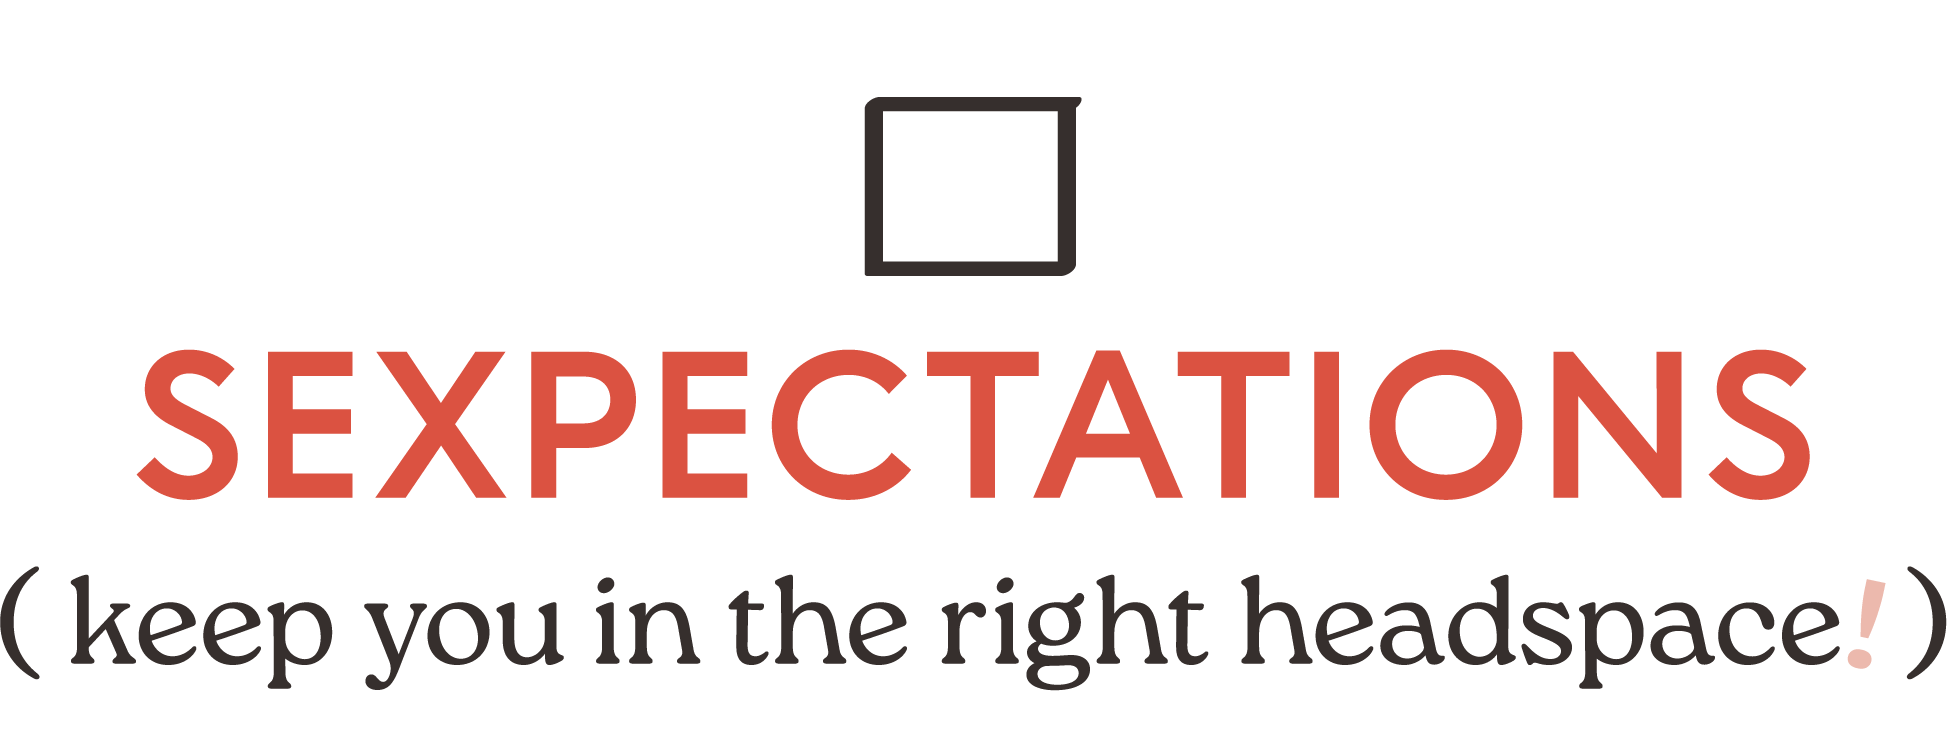 sexpectations (keep you in the right headspace)